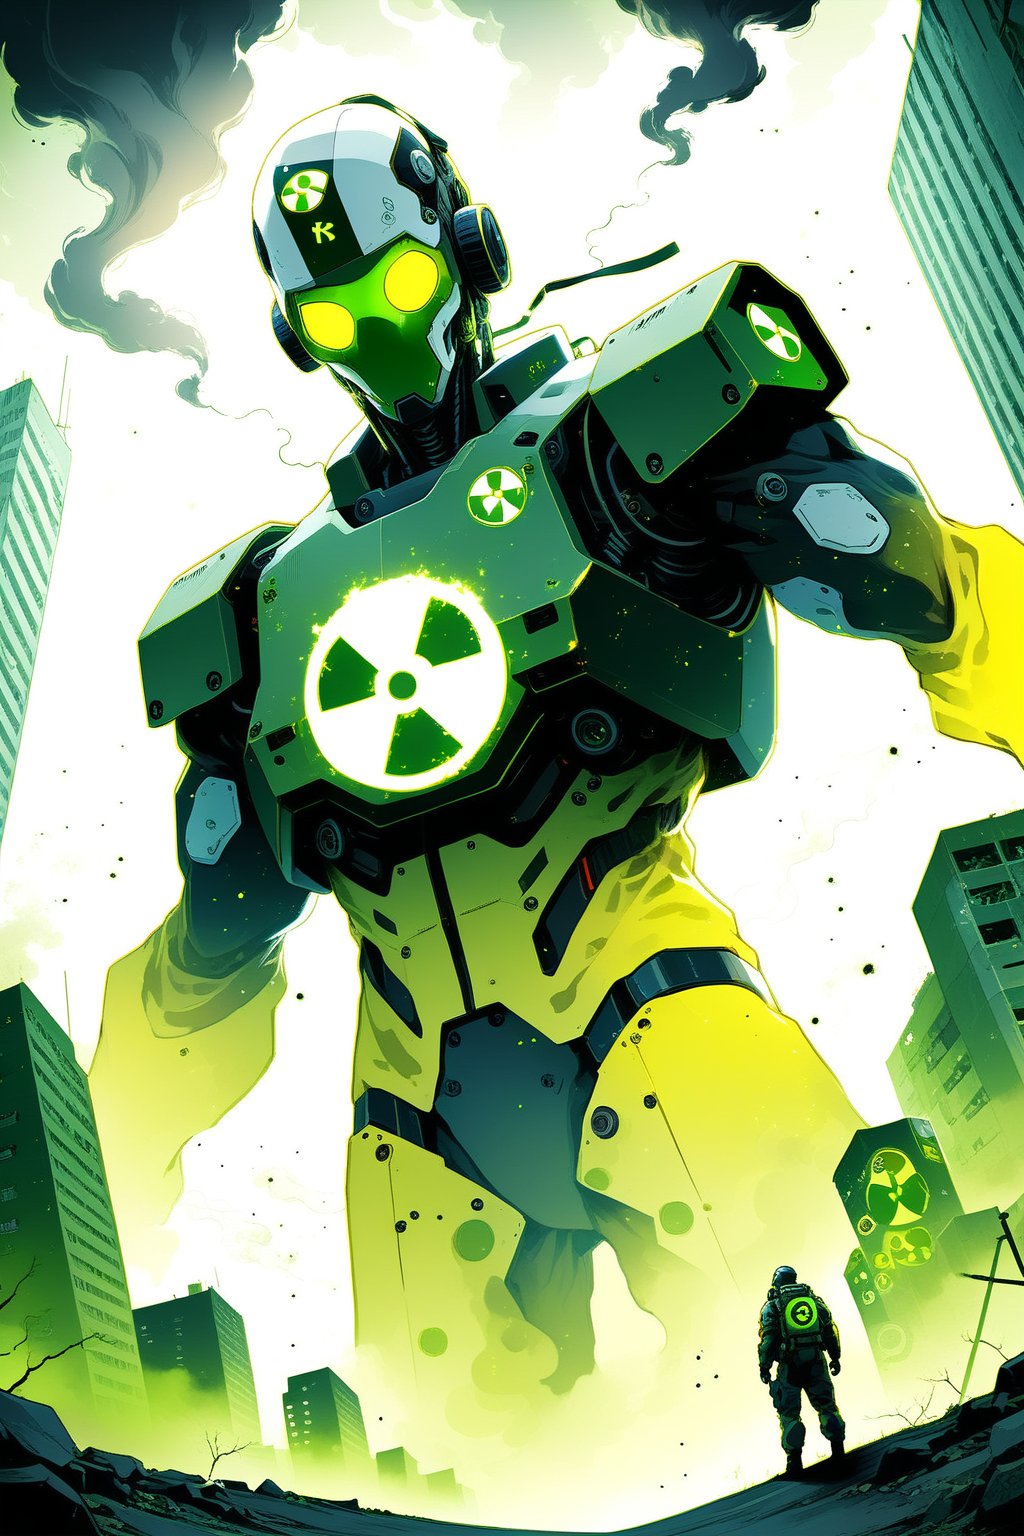 DonMW15pXL, cyborg style, soldier in anti-radiation suit in front of a giant radioactive biological monster, city, toxic smoke, radiation symbol, toxic environmental symbols, radiation, masterpiece, wallpaper